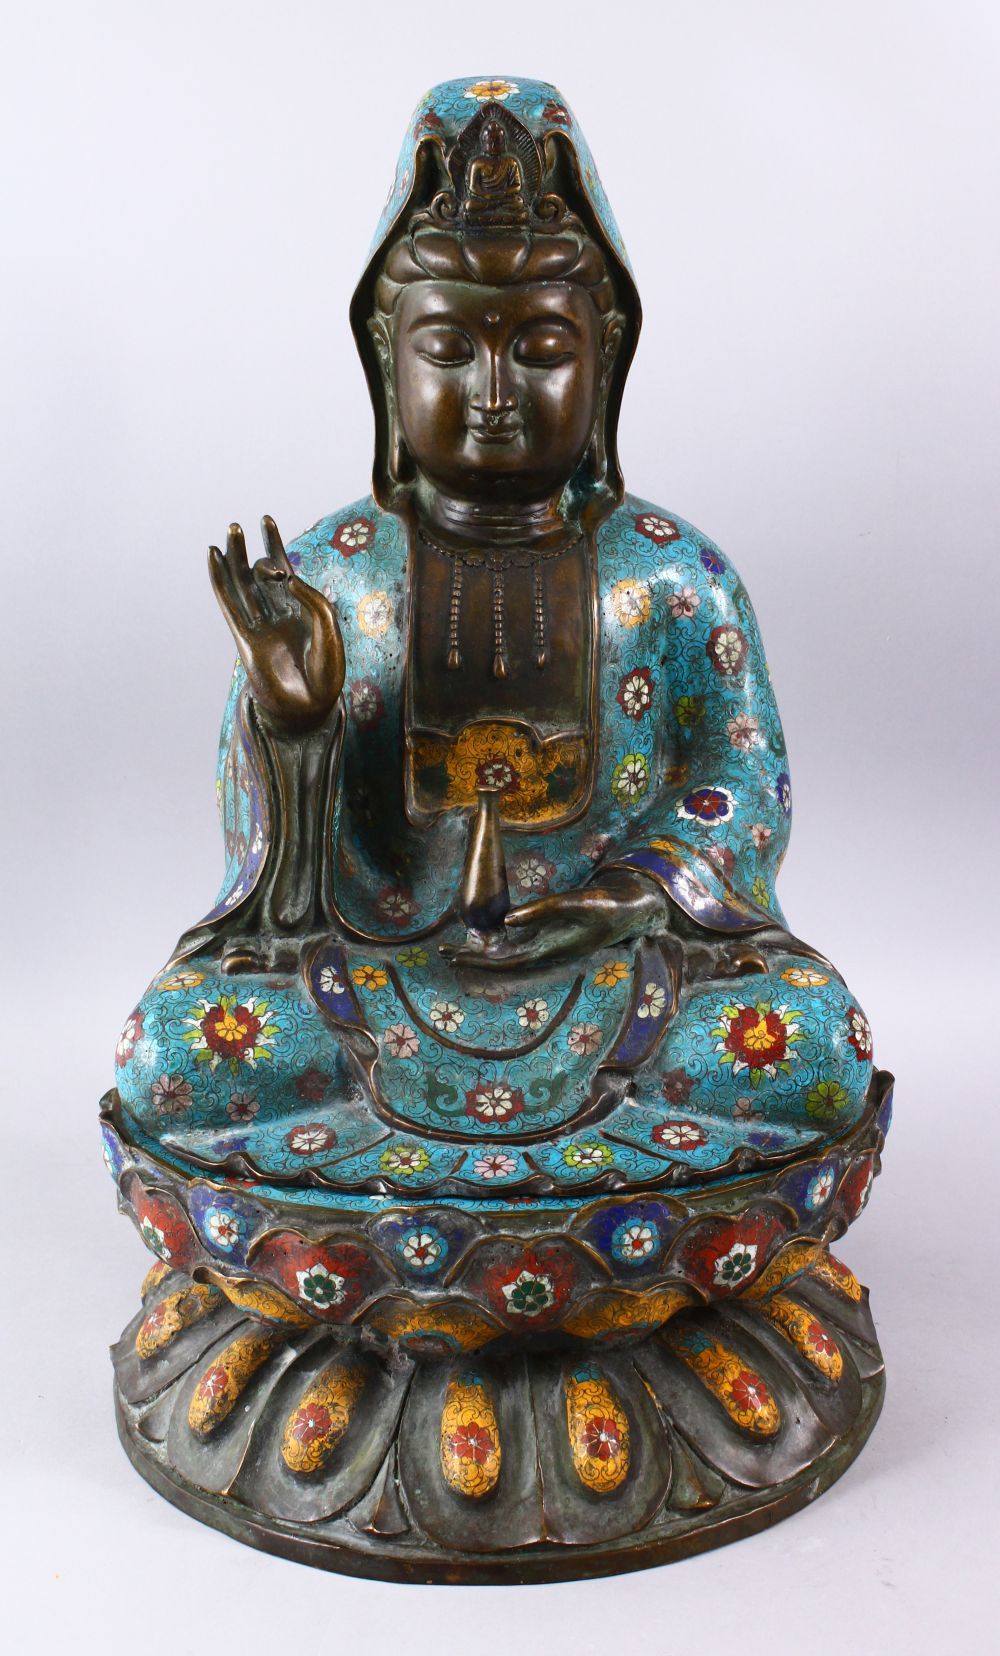 A FINE 19TH CENTURY CHINESE BRONZE & CLOISONNE MODEL OF GUANYIN SEATED UPON LOTUS, guanyin modeled